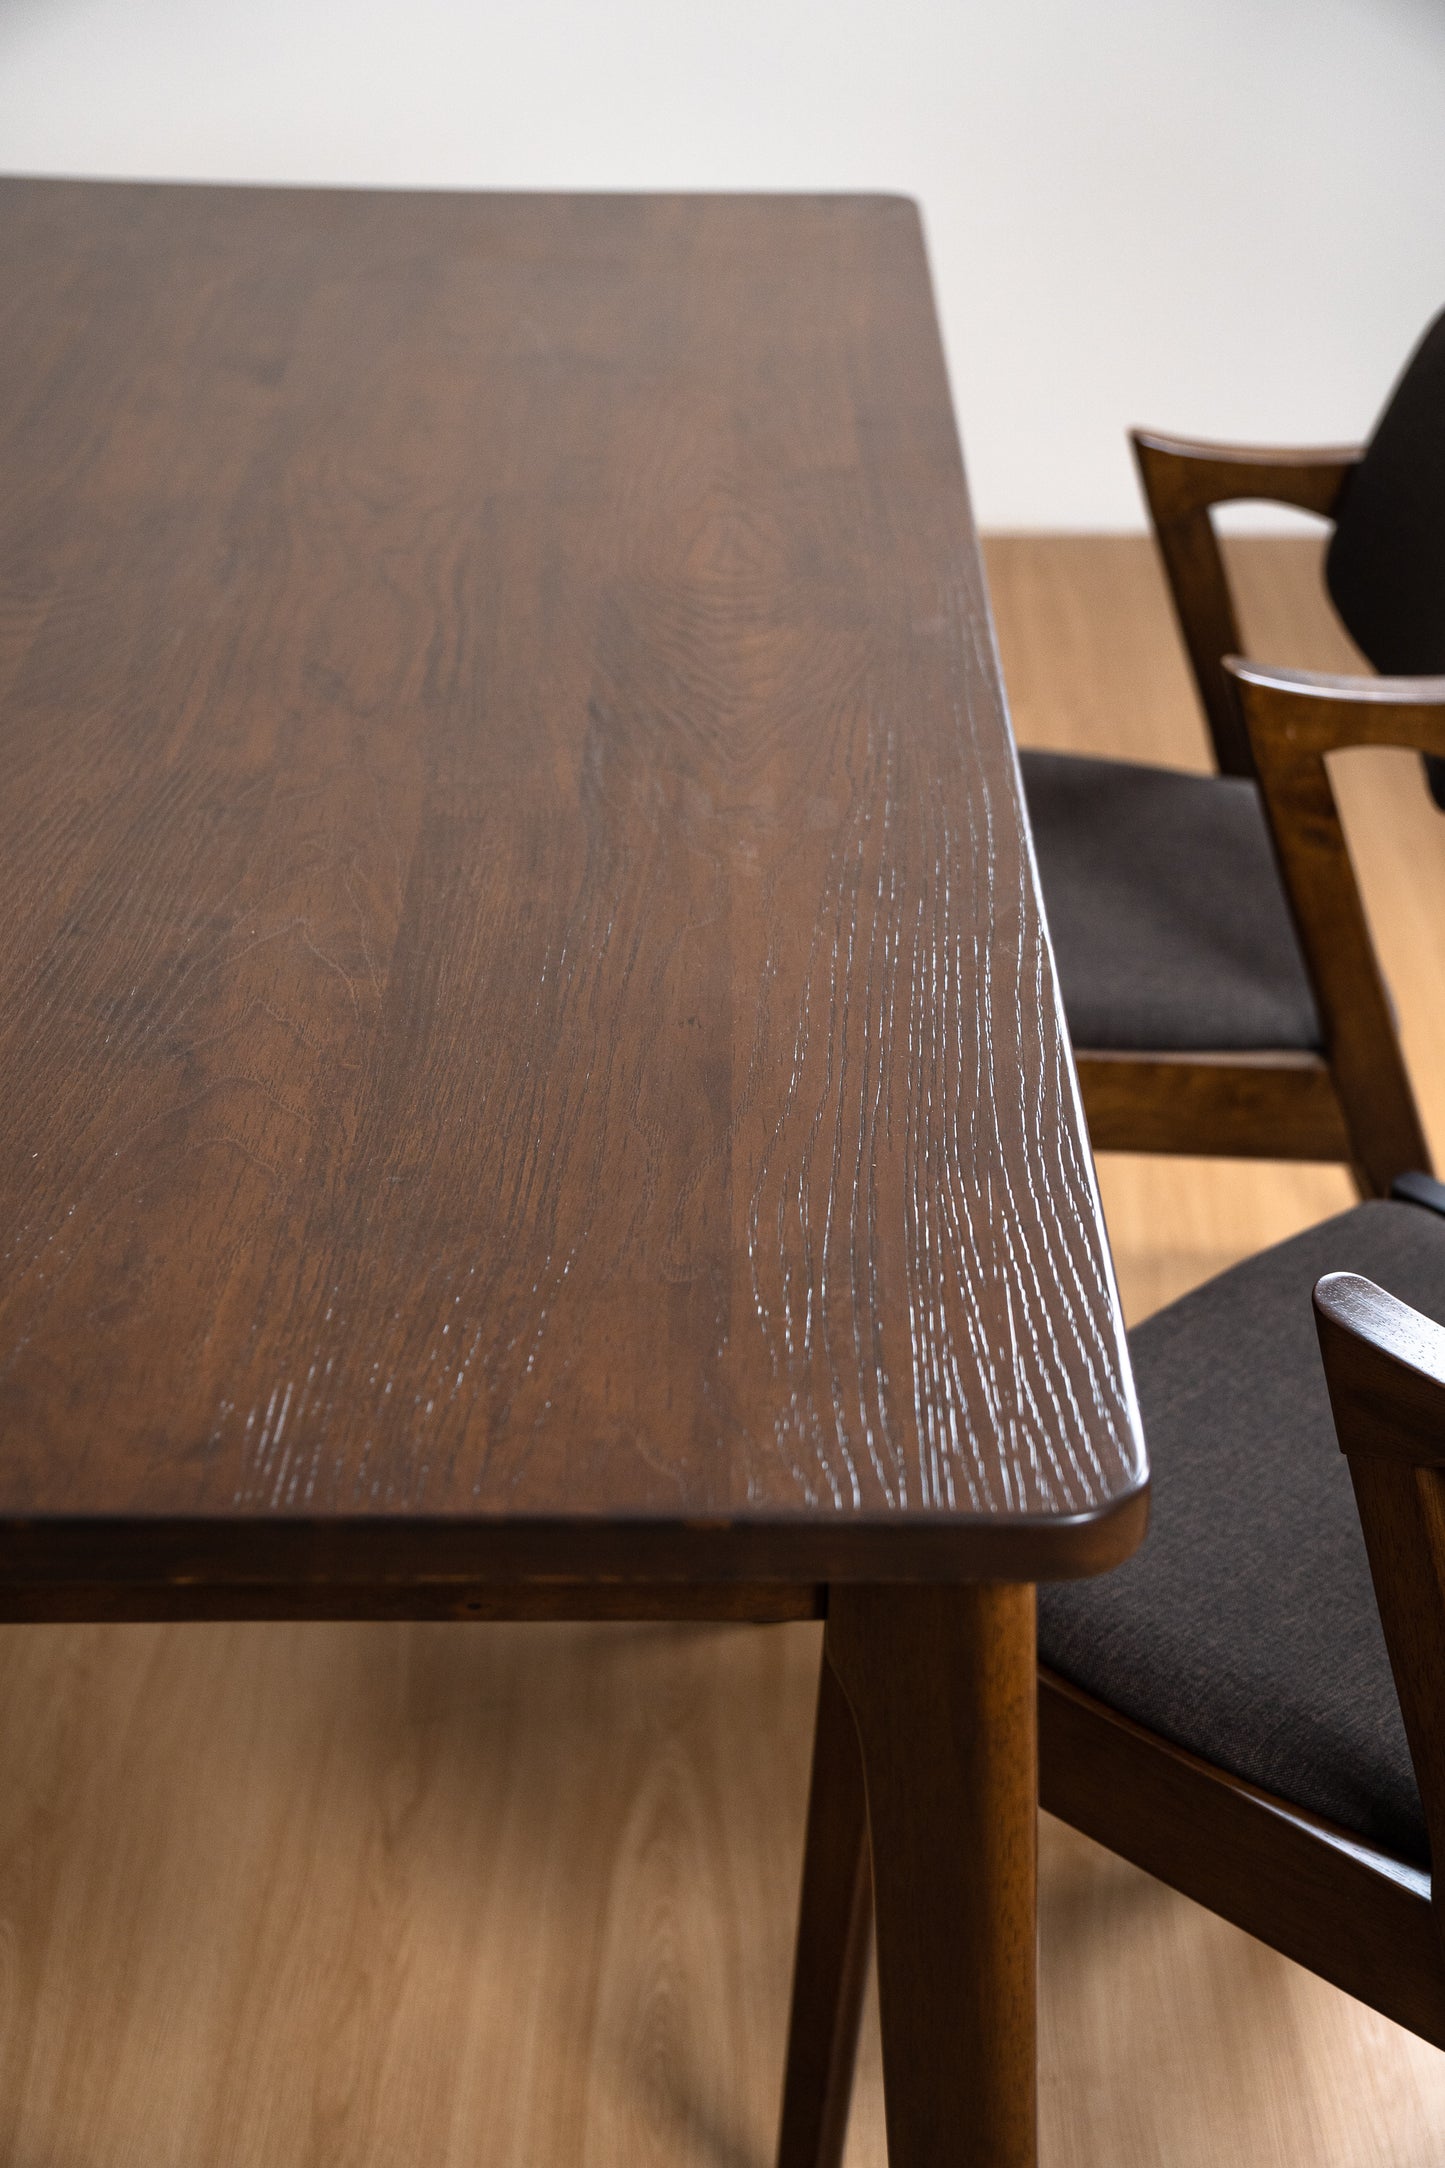 Risom Solid Rubber Wood Table Set